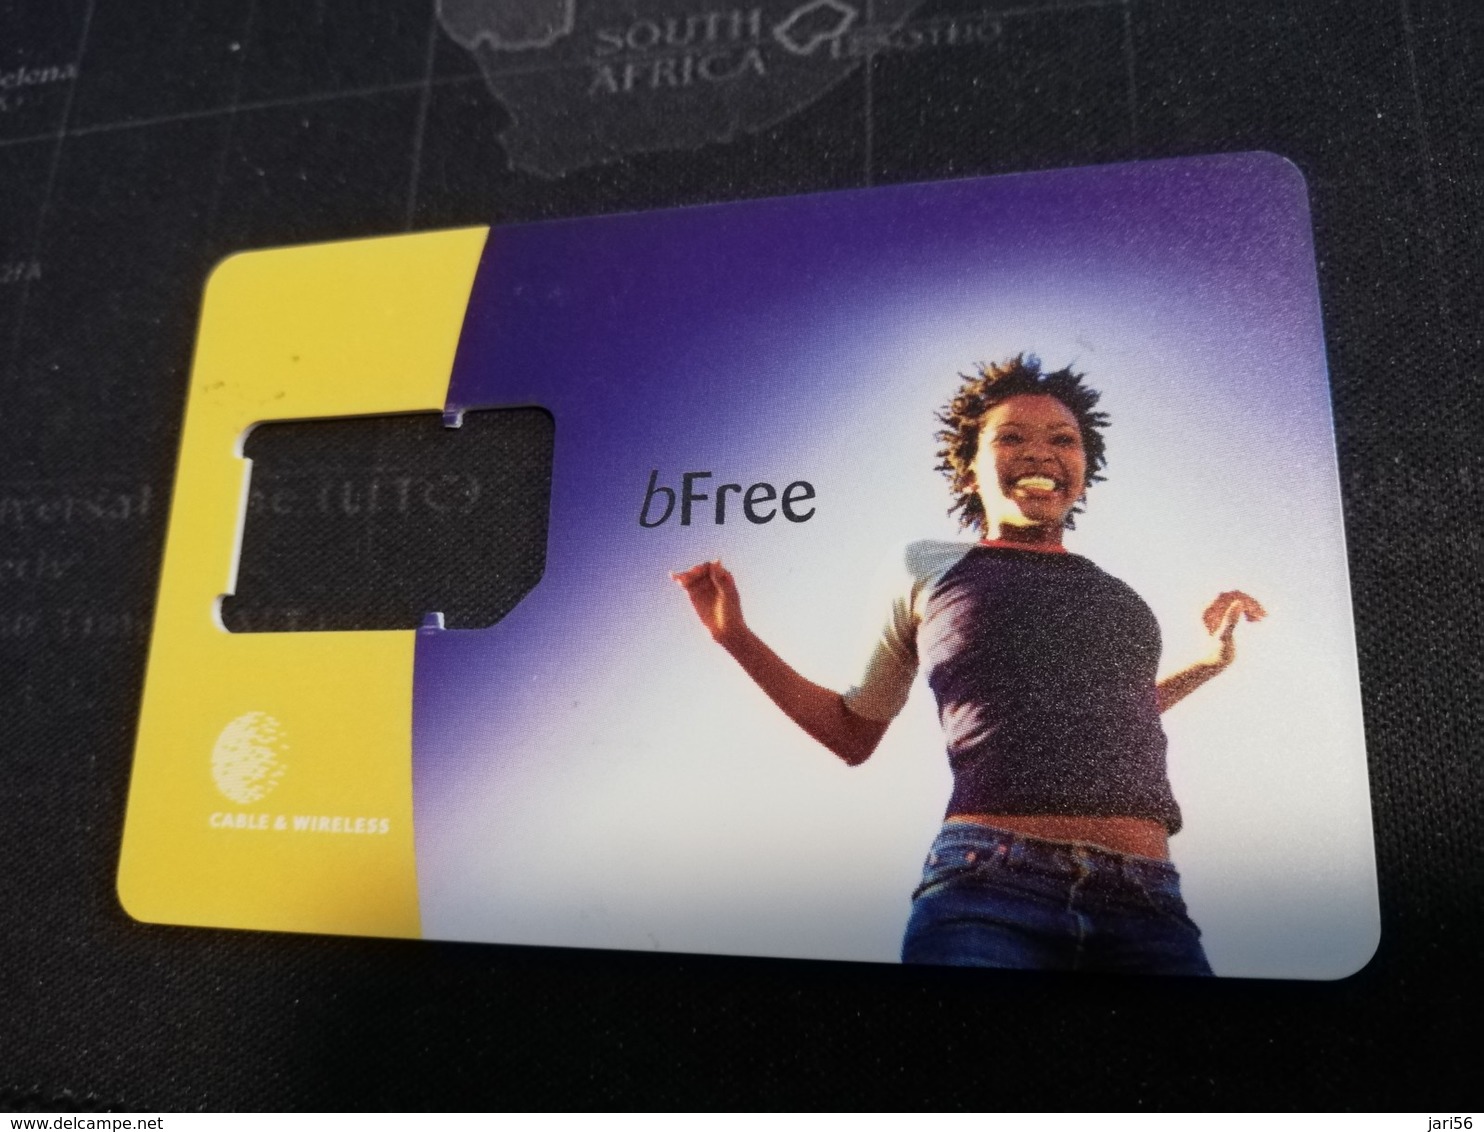 ST LUCIA    $ --     MOBILE CHIP CARRIER  B Free      Prepaid      Fine Used Card  ** 1774** - St. Lucia